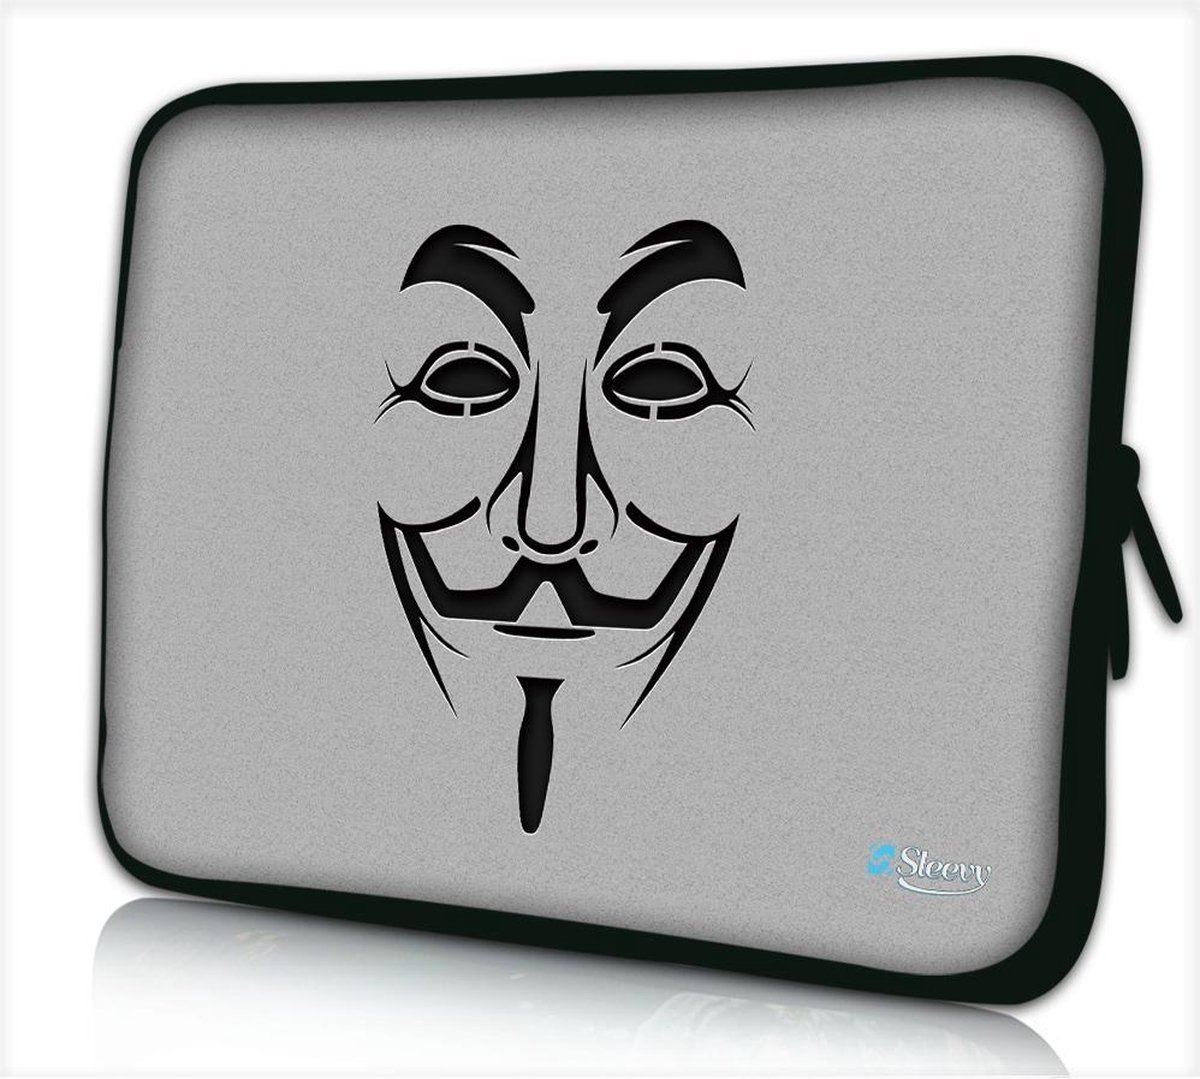 Sleevy 13.3 laptophoes/macbookhoes Vendetta - laptop sleeve - Sleevy collectie 300+ designs